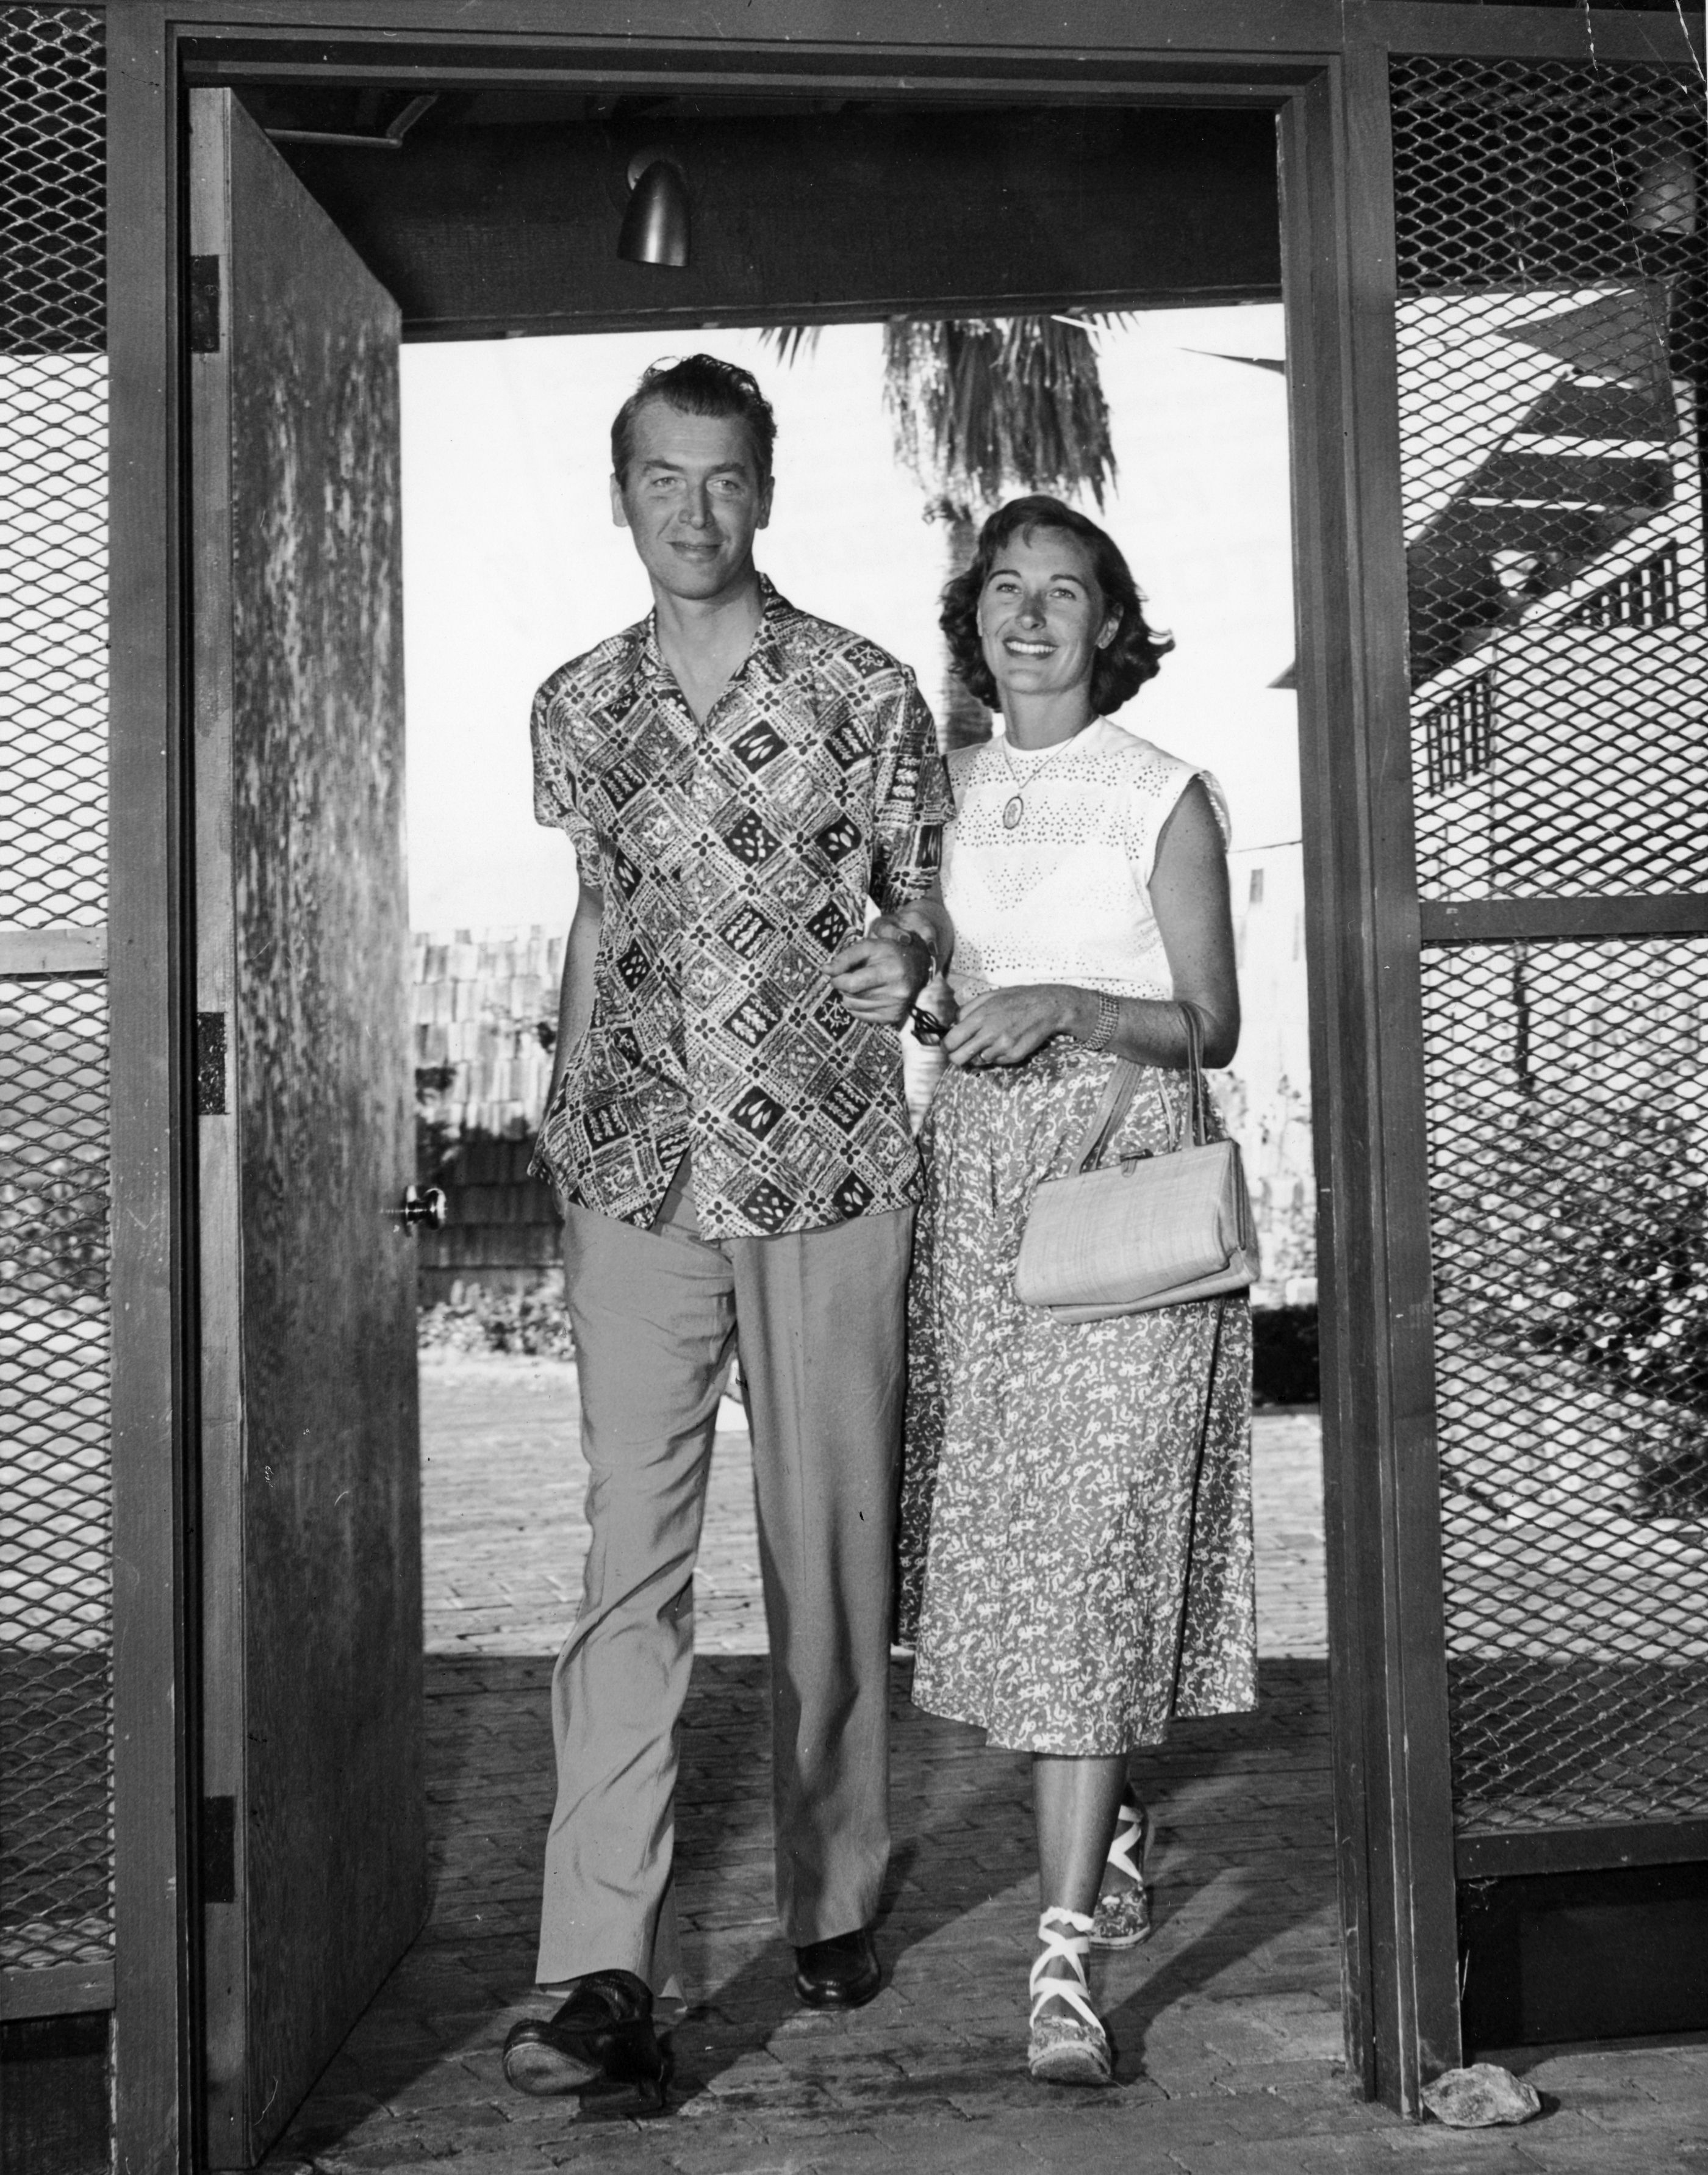 James Stewart and Gloria Hatrick McLean on their way to a water ballet at the opening of the Shadow Mountain Club Resort, Palm Desert, California, in 1955. | Source: Getty Images